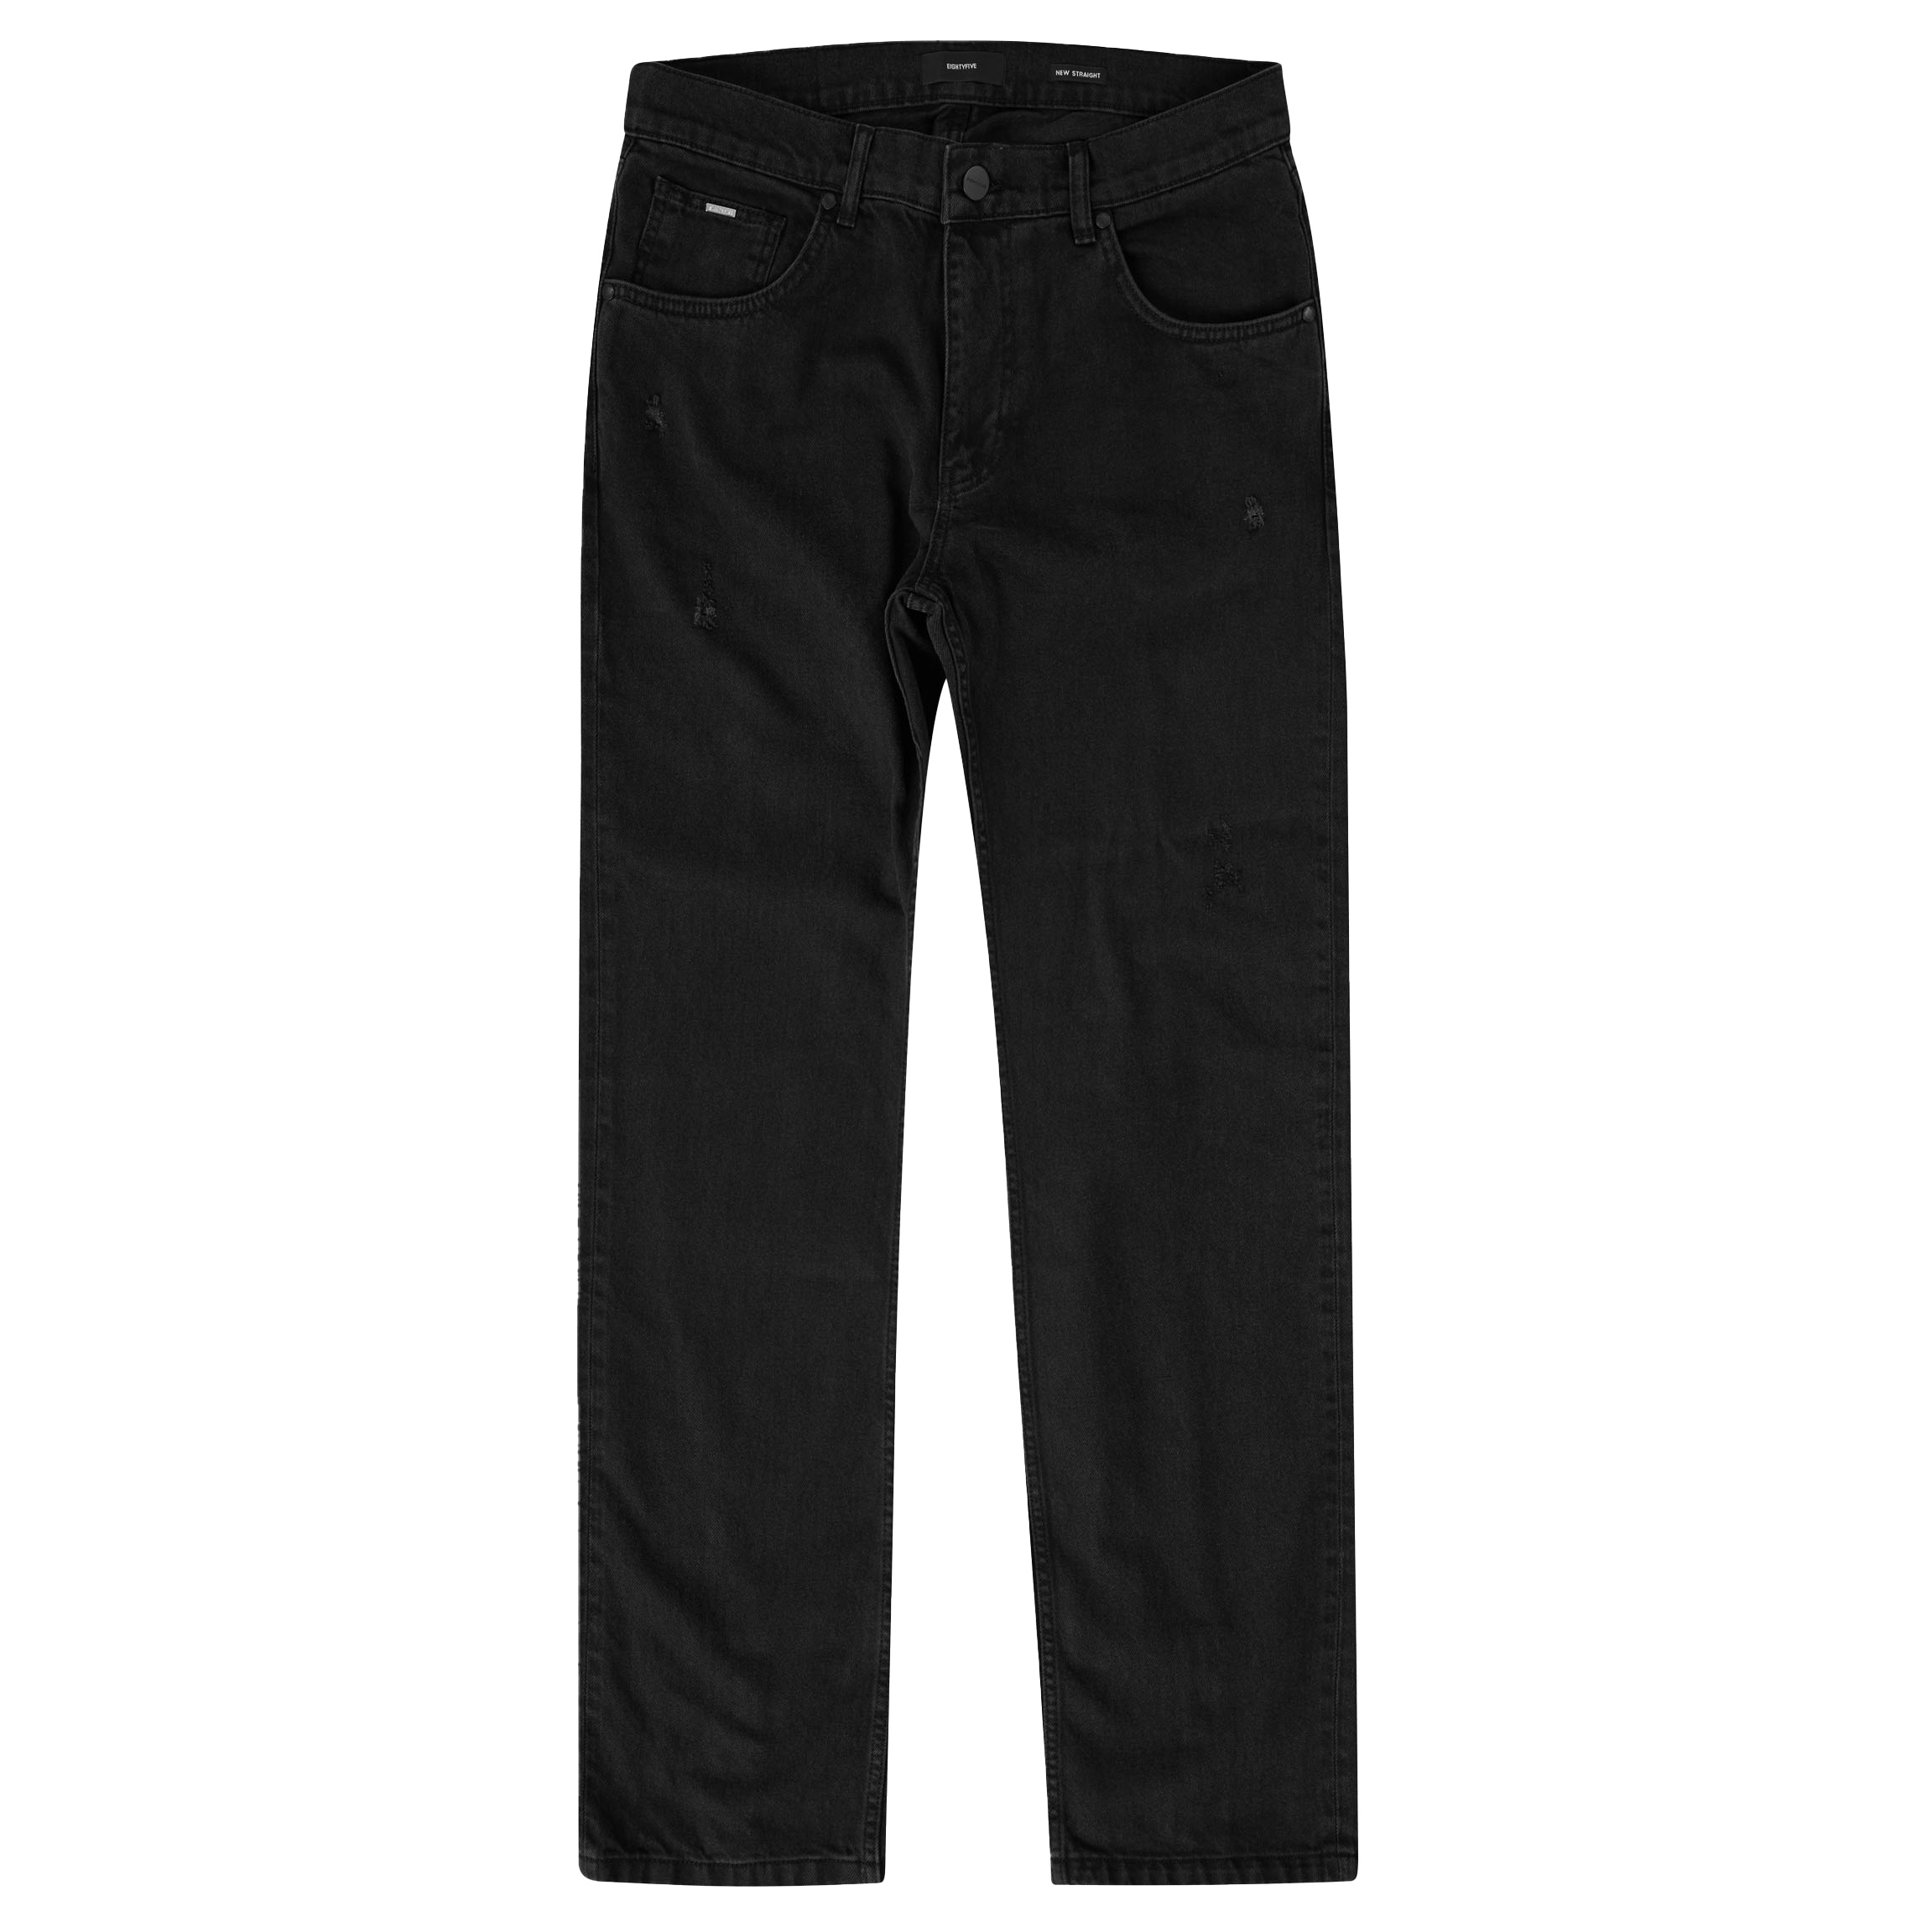 Eightyfive Back Zipped Jeans, Black Washed